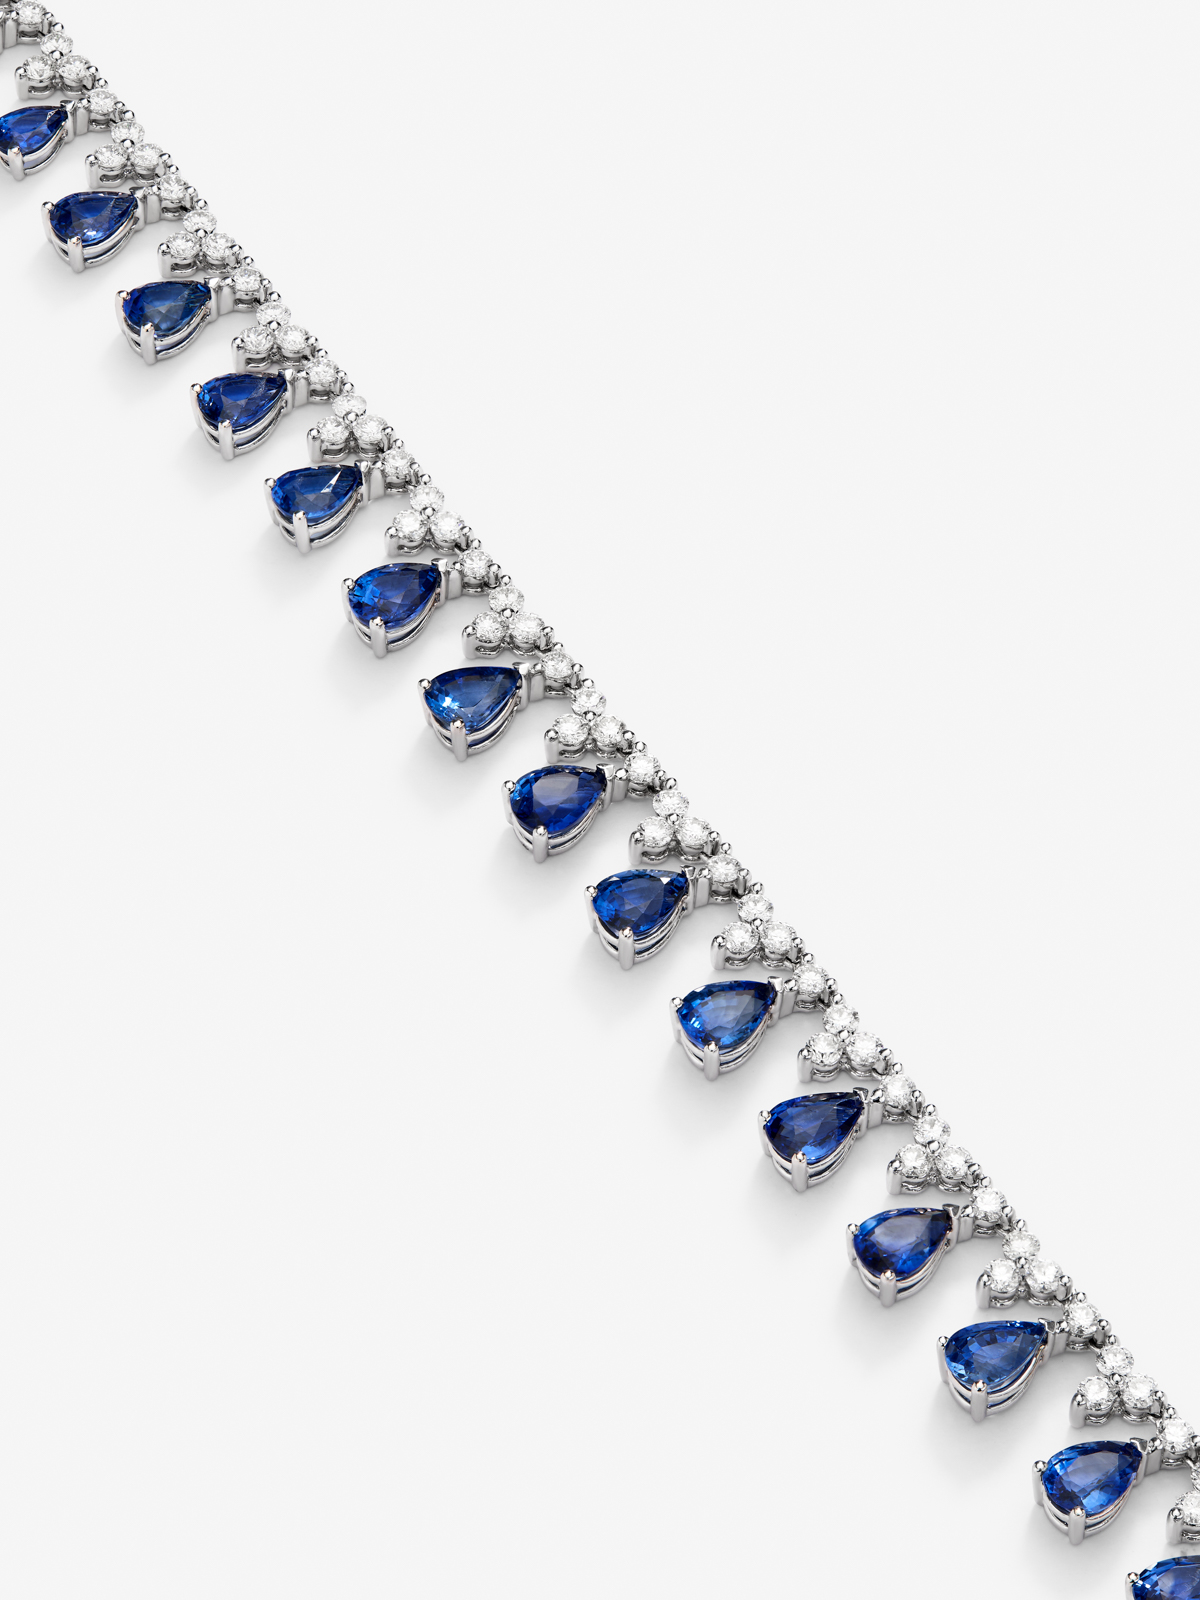 18K White Gold Rivière Collar with blue slopes of 16.62 cts and white diamonds in 8.84 cts bright diamonds